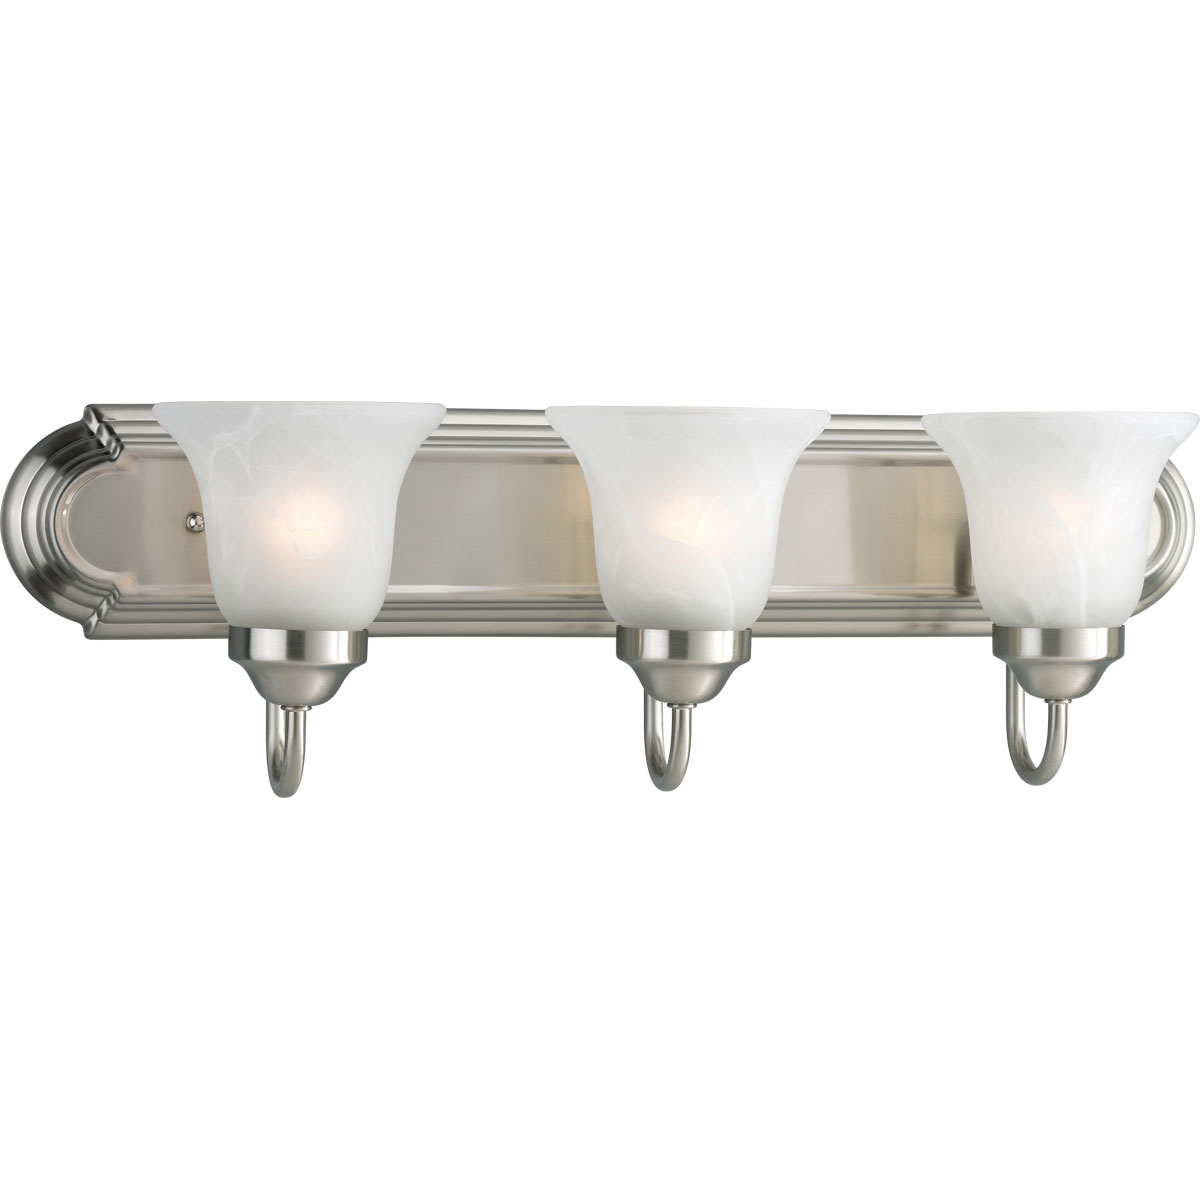 Three-light bath bracket on an elongated racetrack-style backplate, this collection features a simple transitional design. Decorative wall lighting complements most traditional bathrooms or powder rooms. Brushed metallic finish coordinates with popular faucet and bath hardware styles. Flaired, Alabaster glass give a unique, poised finish.